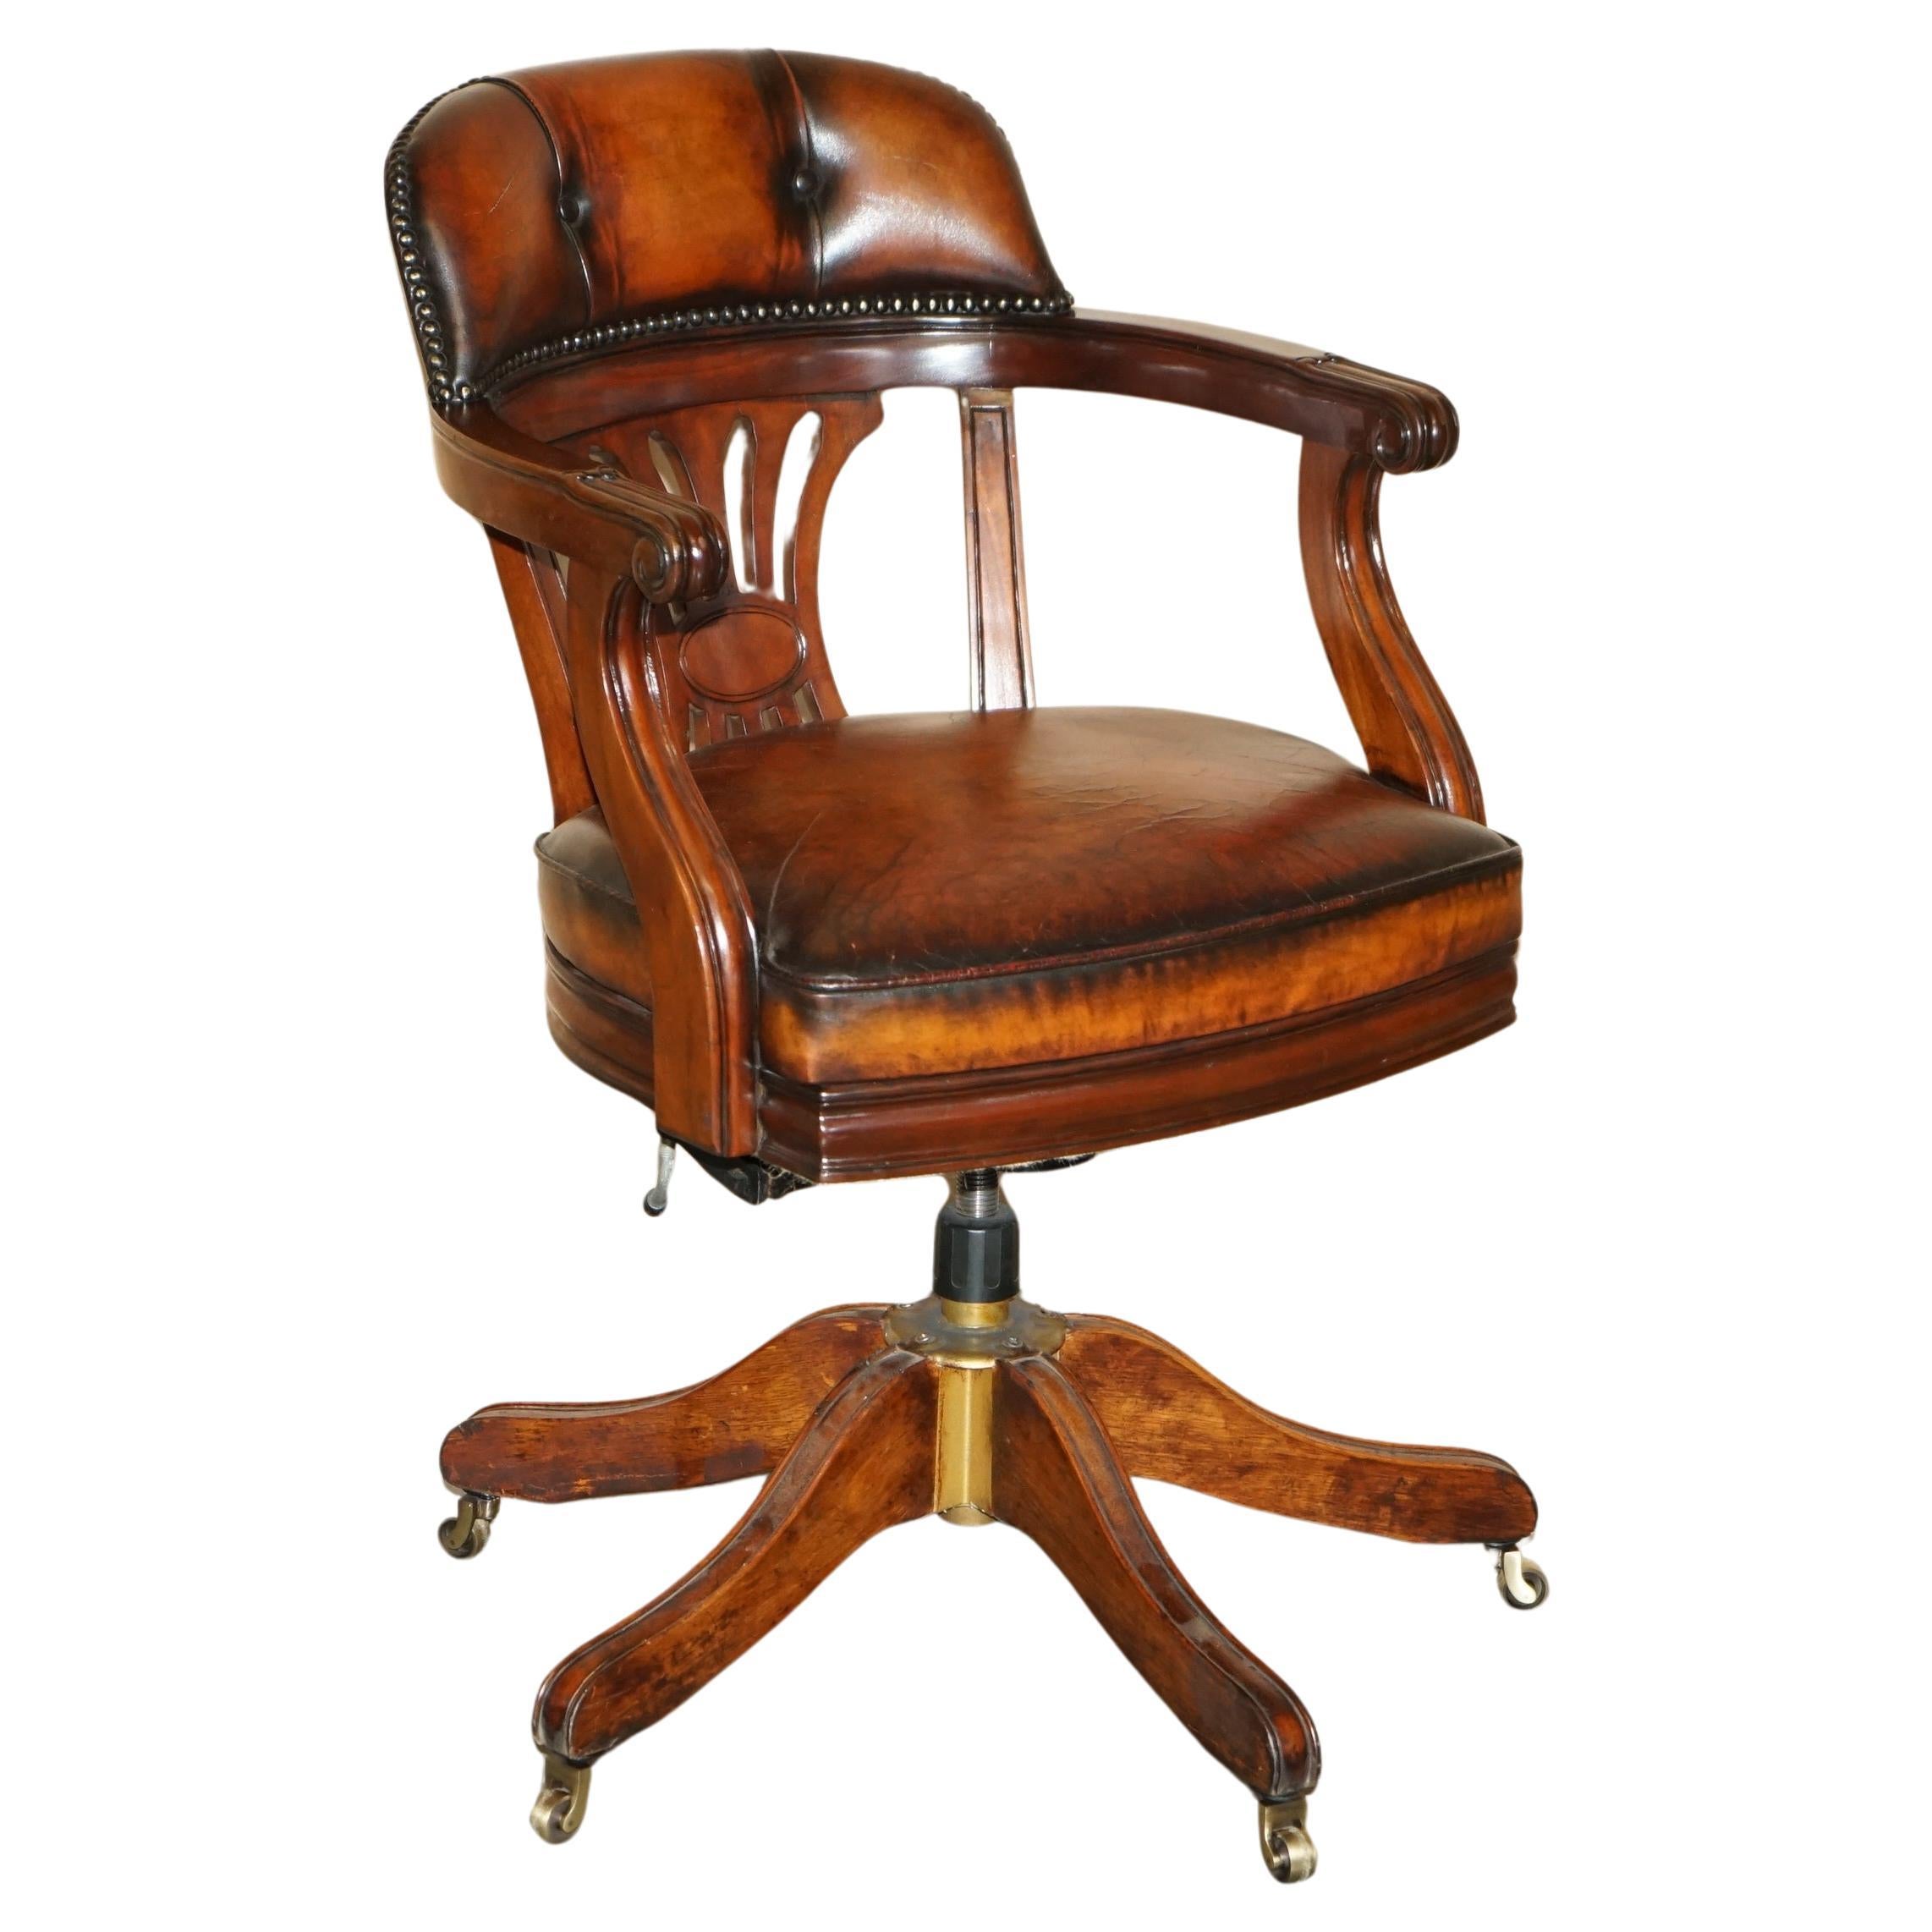 VINTAGE FULLY RESTORED DEEP CIGAR BROWN LEATHER SWiVEL CAPTAINS OFFICE CHAIR